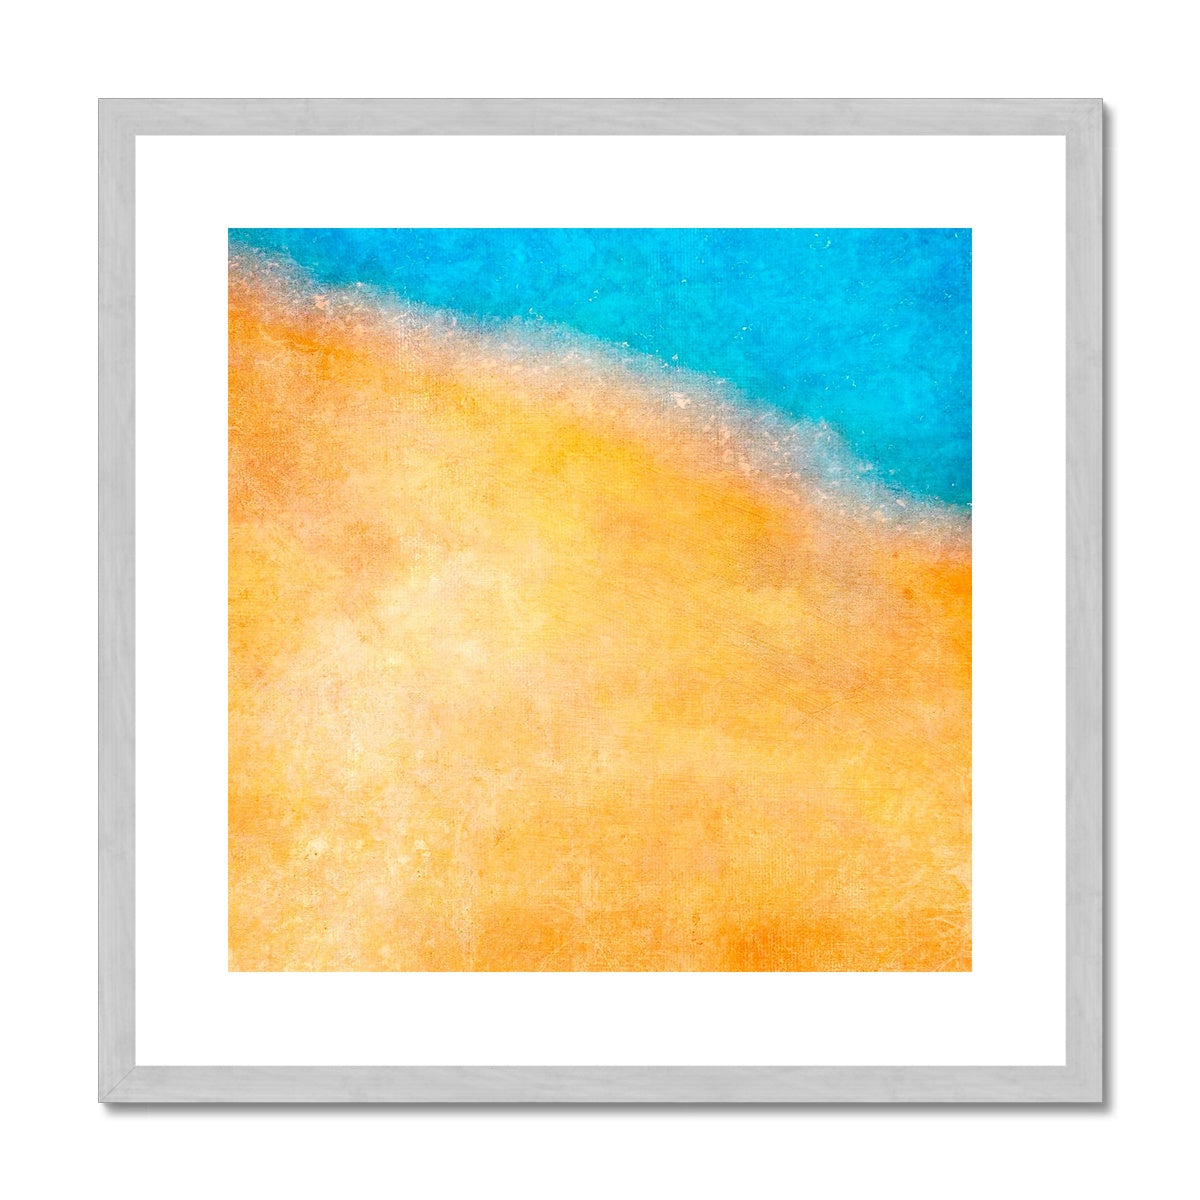 The Shoreline Abstract Painting | Antique Framed & Mounted Prints From Scotland-Antique Framed & Mounted Prints-Abstract & Impressionistic Art Gallery-20"x20"-Silver Frame-Paintings, Prints, Homeware, Art Gifts From Scotland By Scottish Artist Kevin Hunter